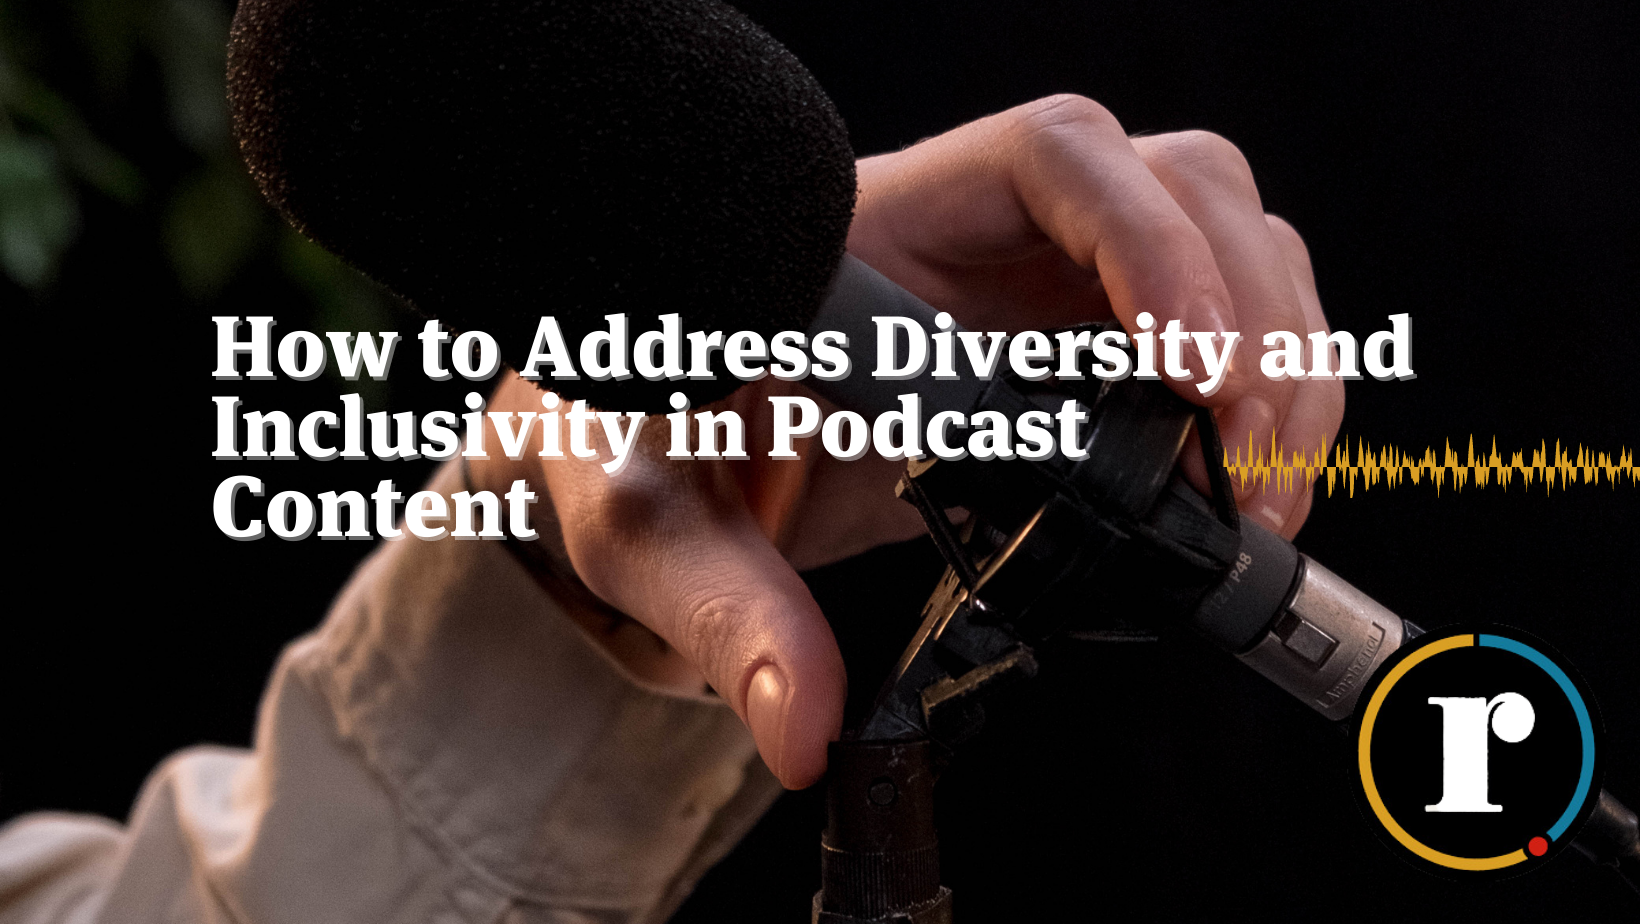 How to Address Diversity and Inclusivity in Podcast Content